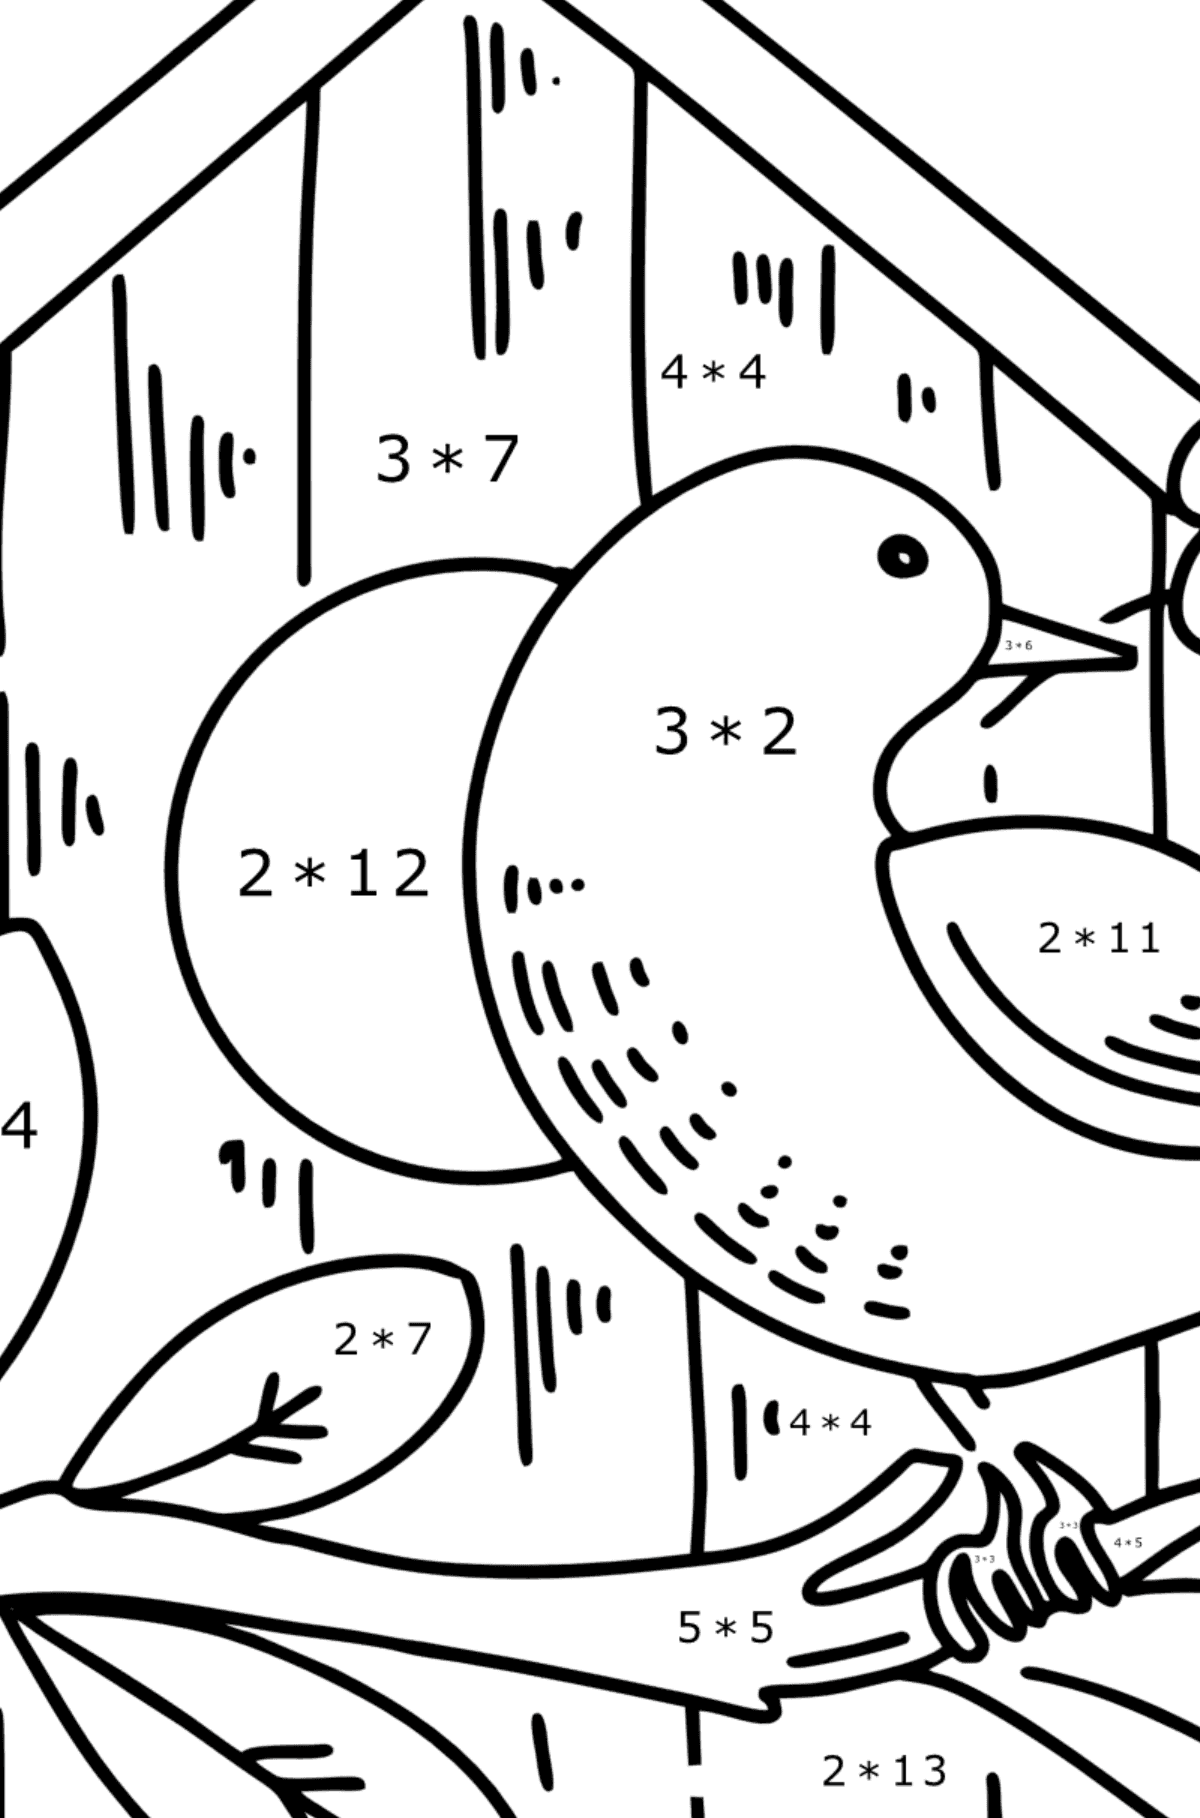 Starling at the Birdhouse coloring page - Math Coloring - Multiplication for Kids